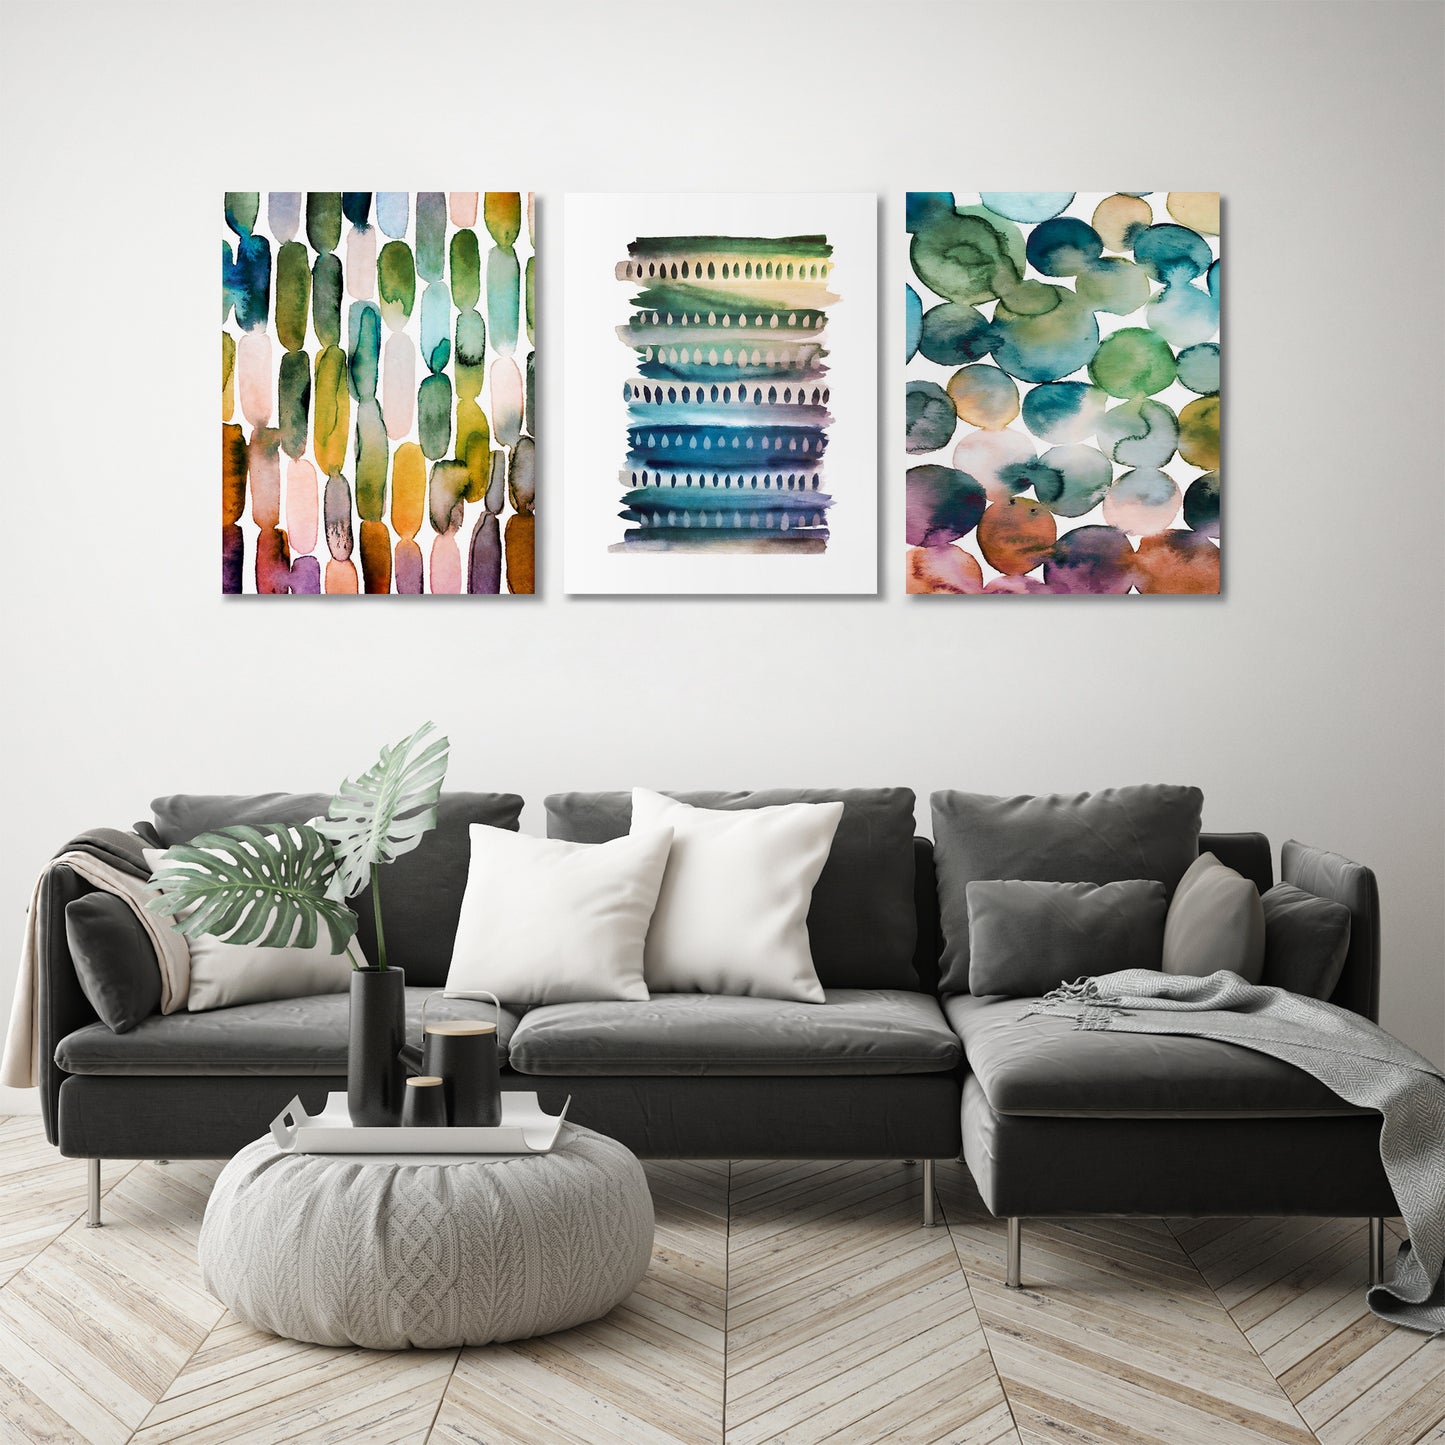 Earth Tone Strokes by Lisa Nohren - 3 Piece Canvas Triptych - Americanflat